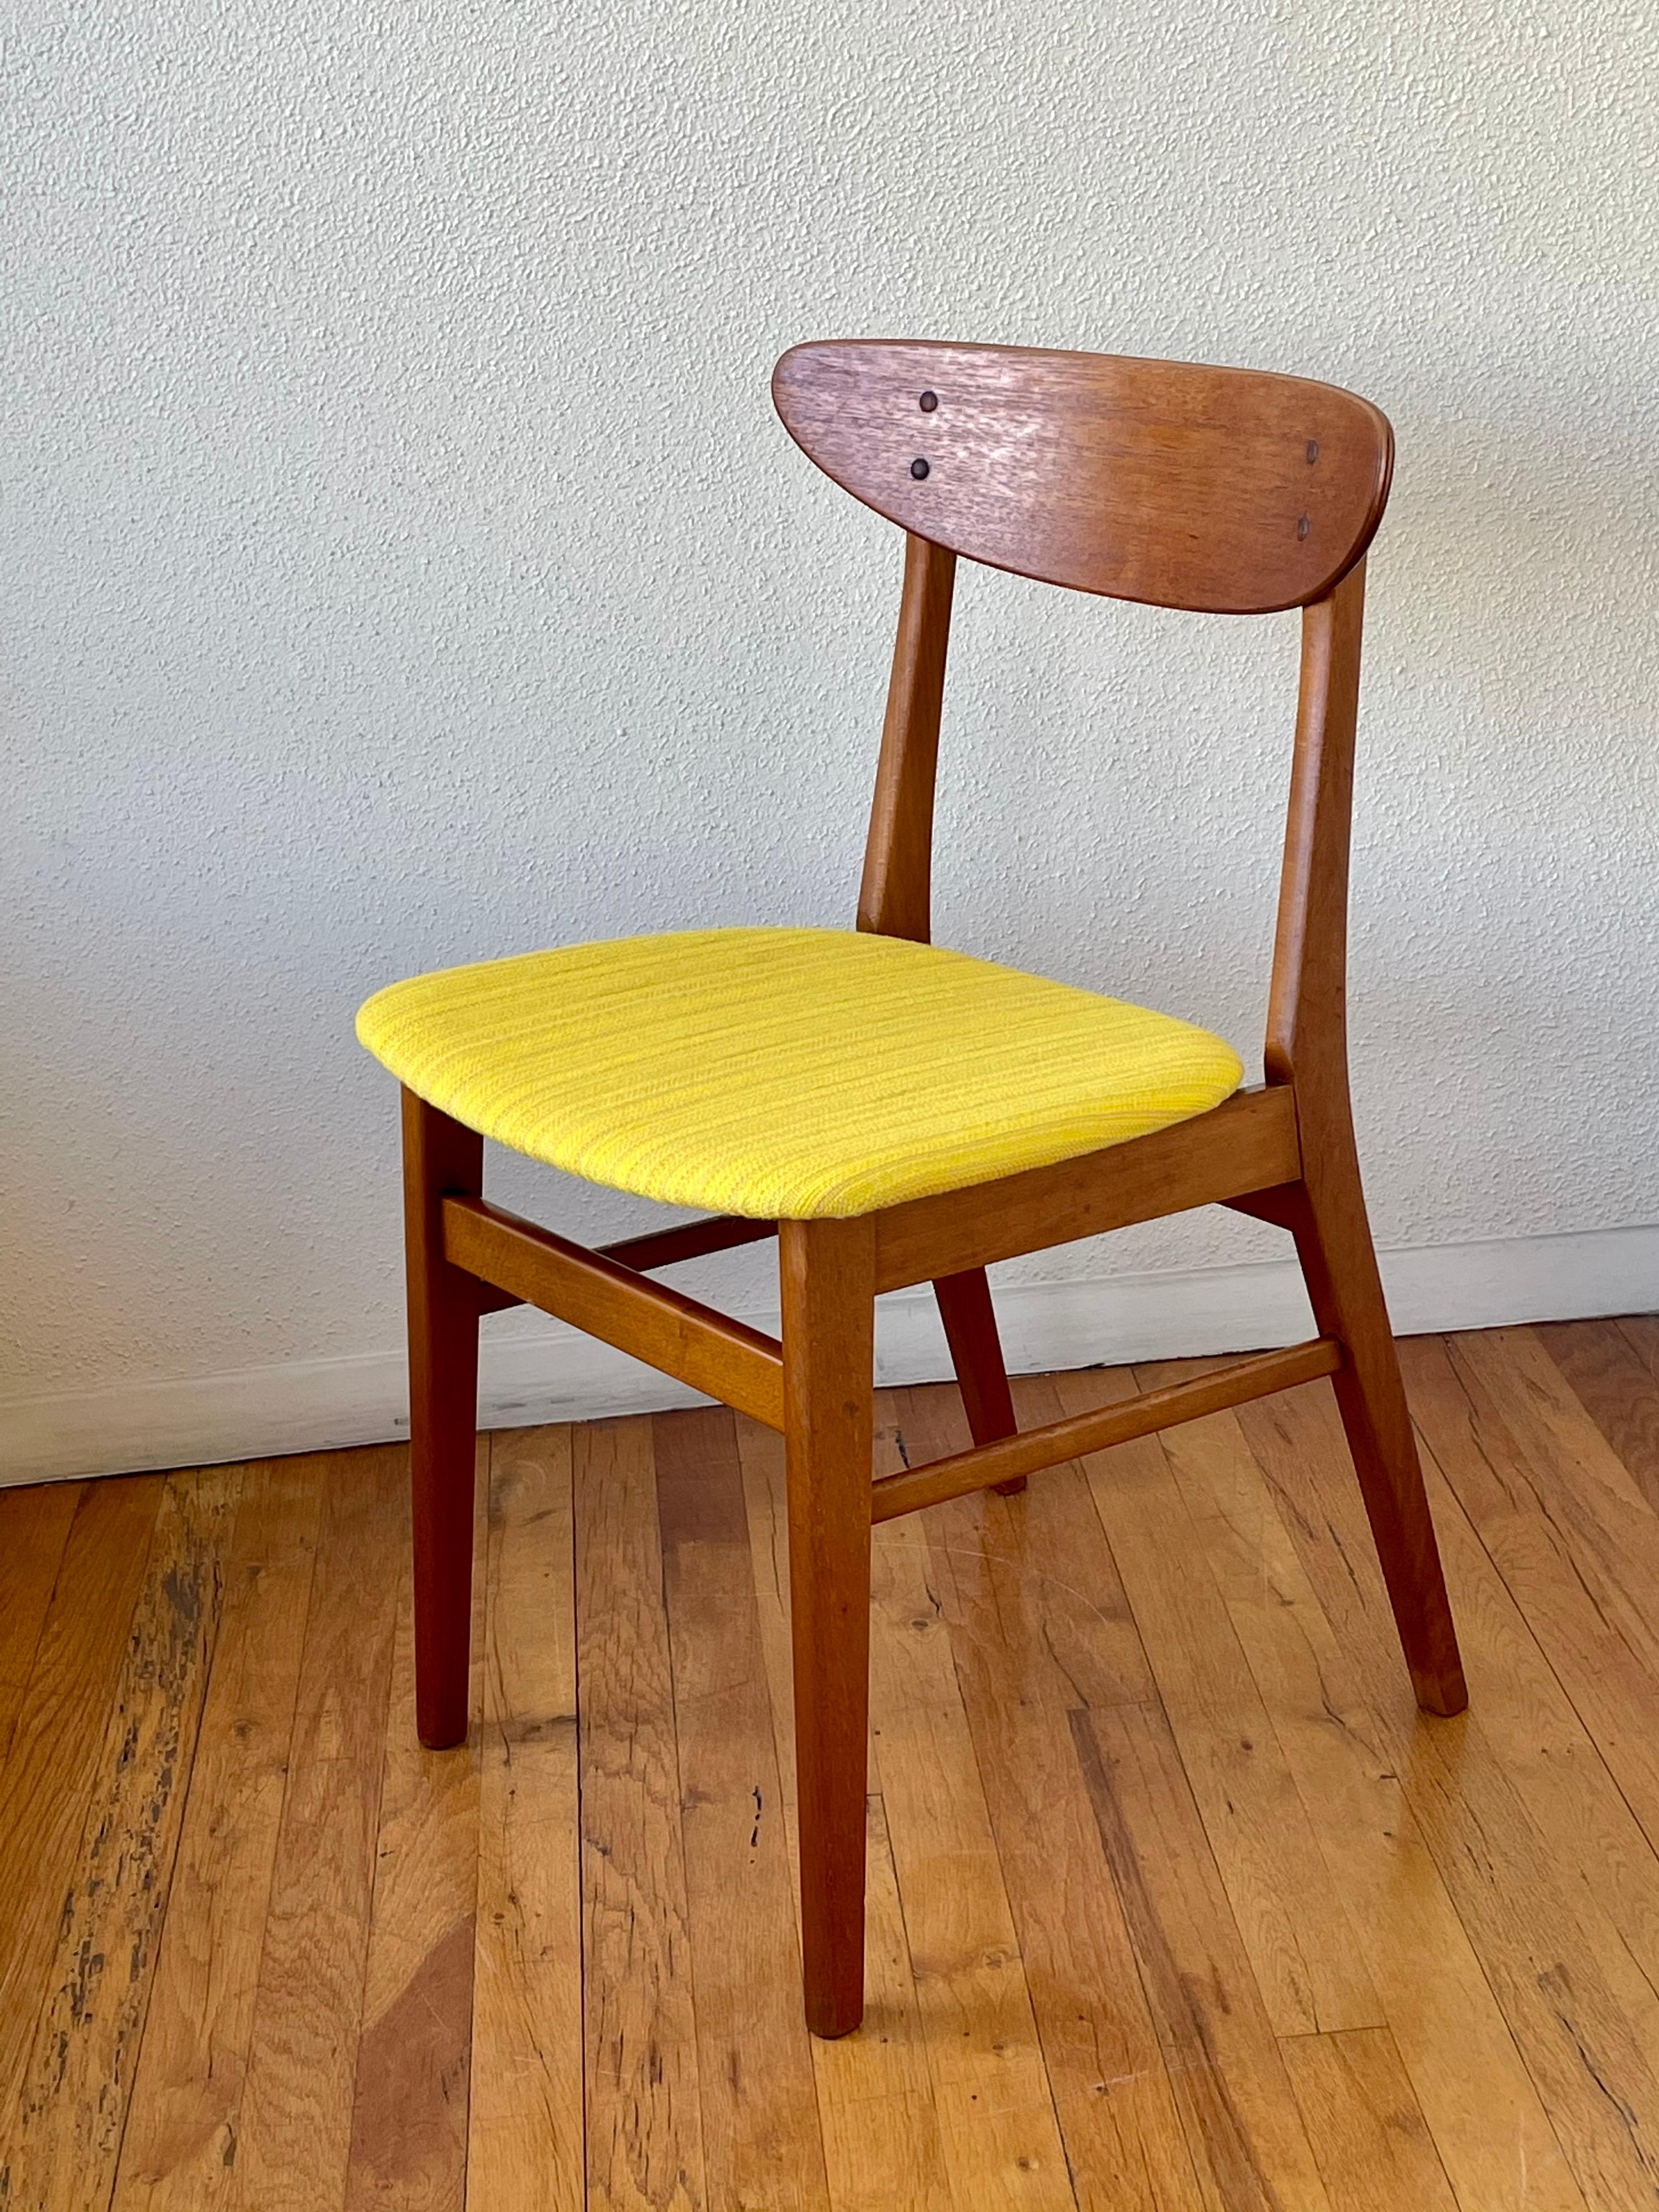 Pair of Danish Modern Chairs by Farstrup Mobler 1